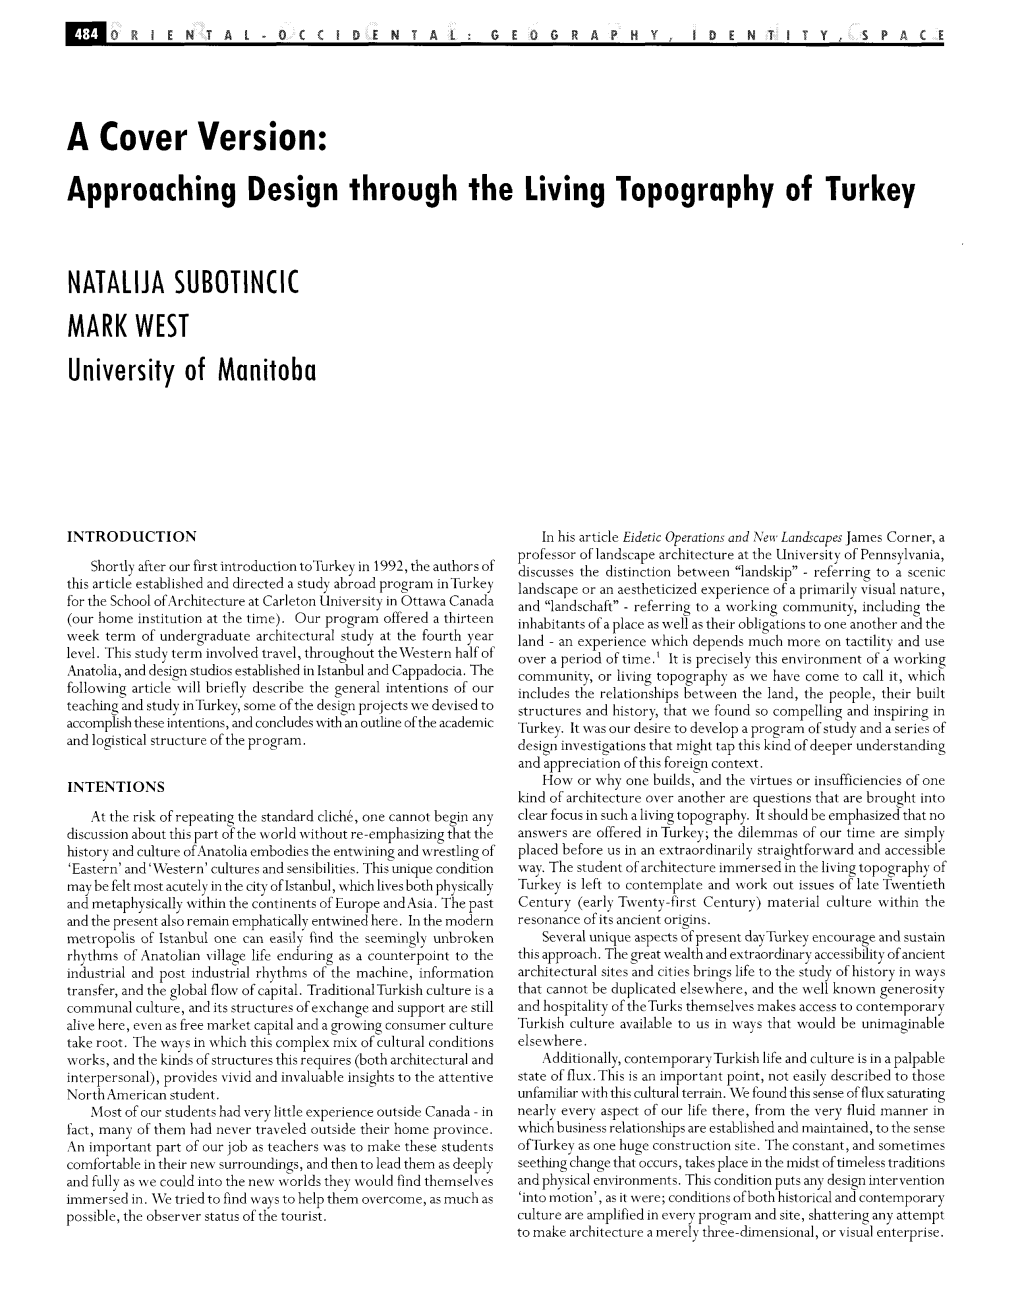 A Cover Version: Approaching Design Through the Living Topography of Turkey